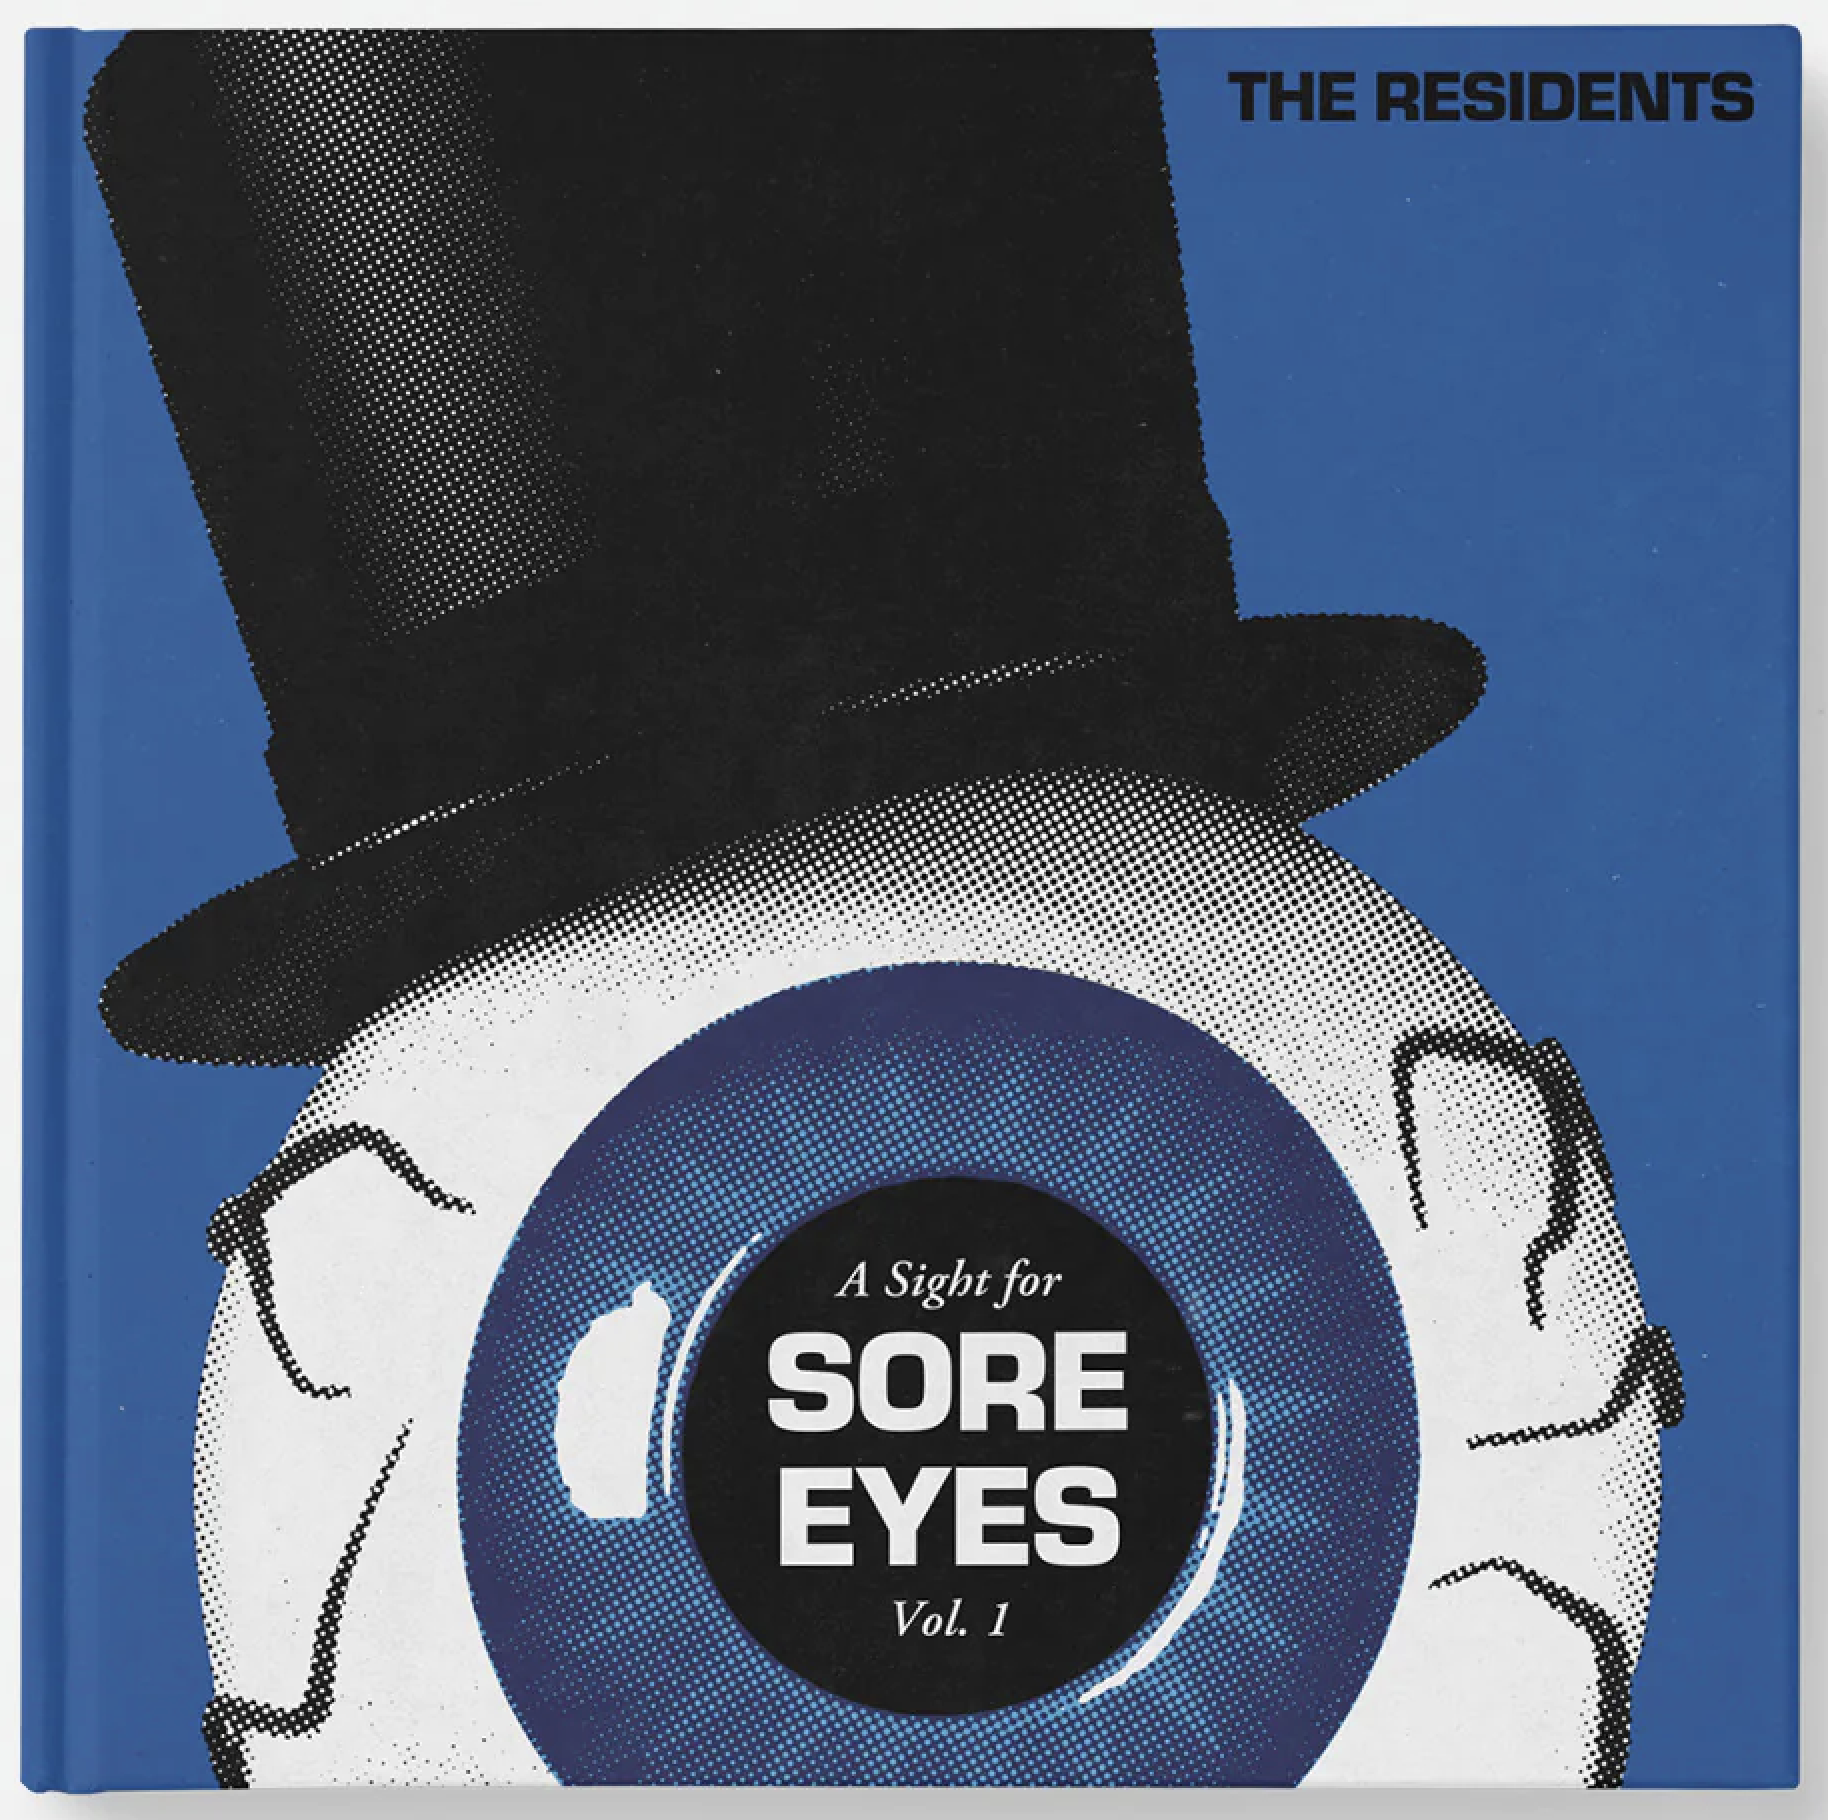 THE RESIDENTS (MELODIC VIRTUE)